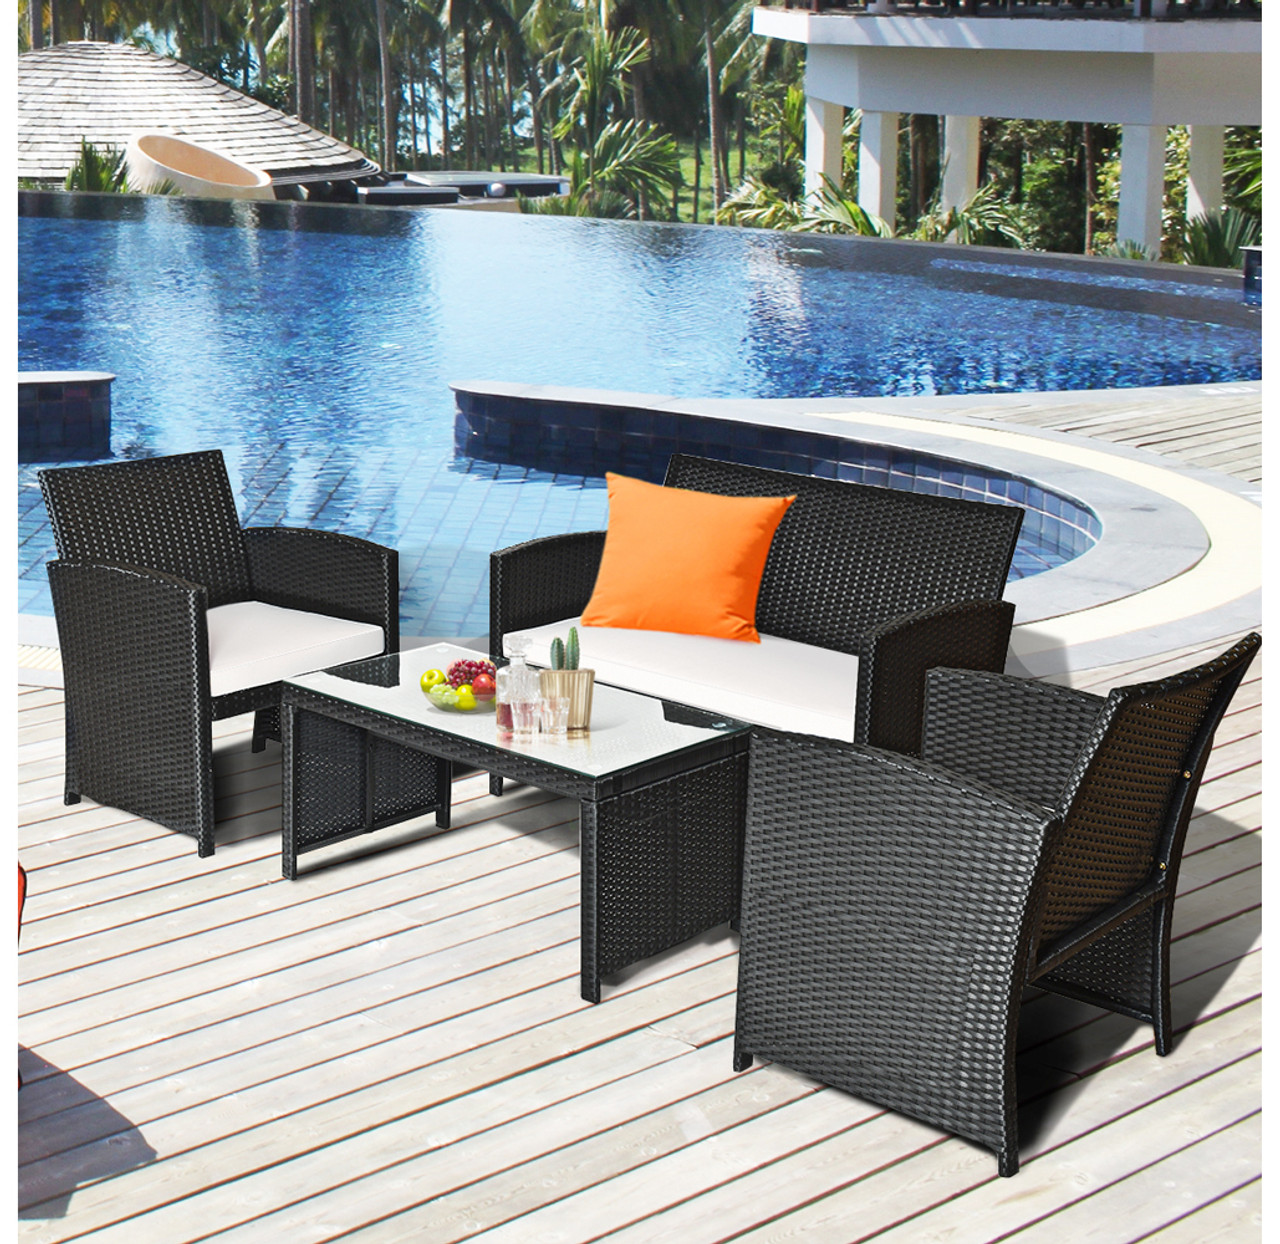 Rattan 4-Piece Loveseat & Chairs Patio Set product image